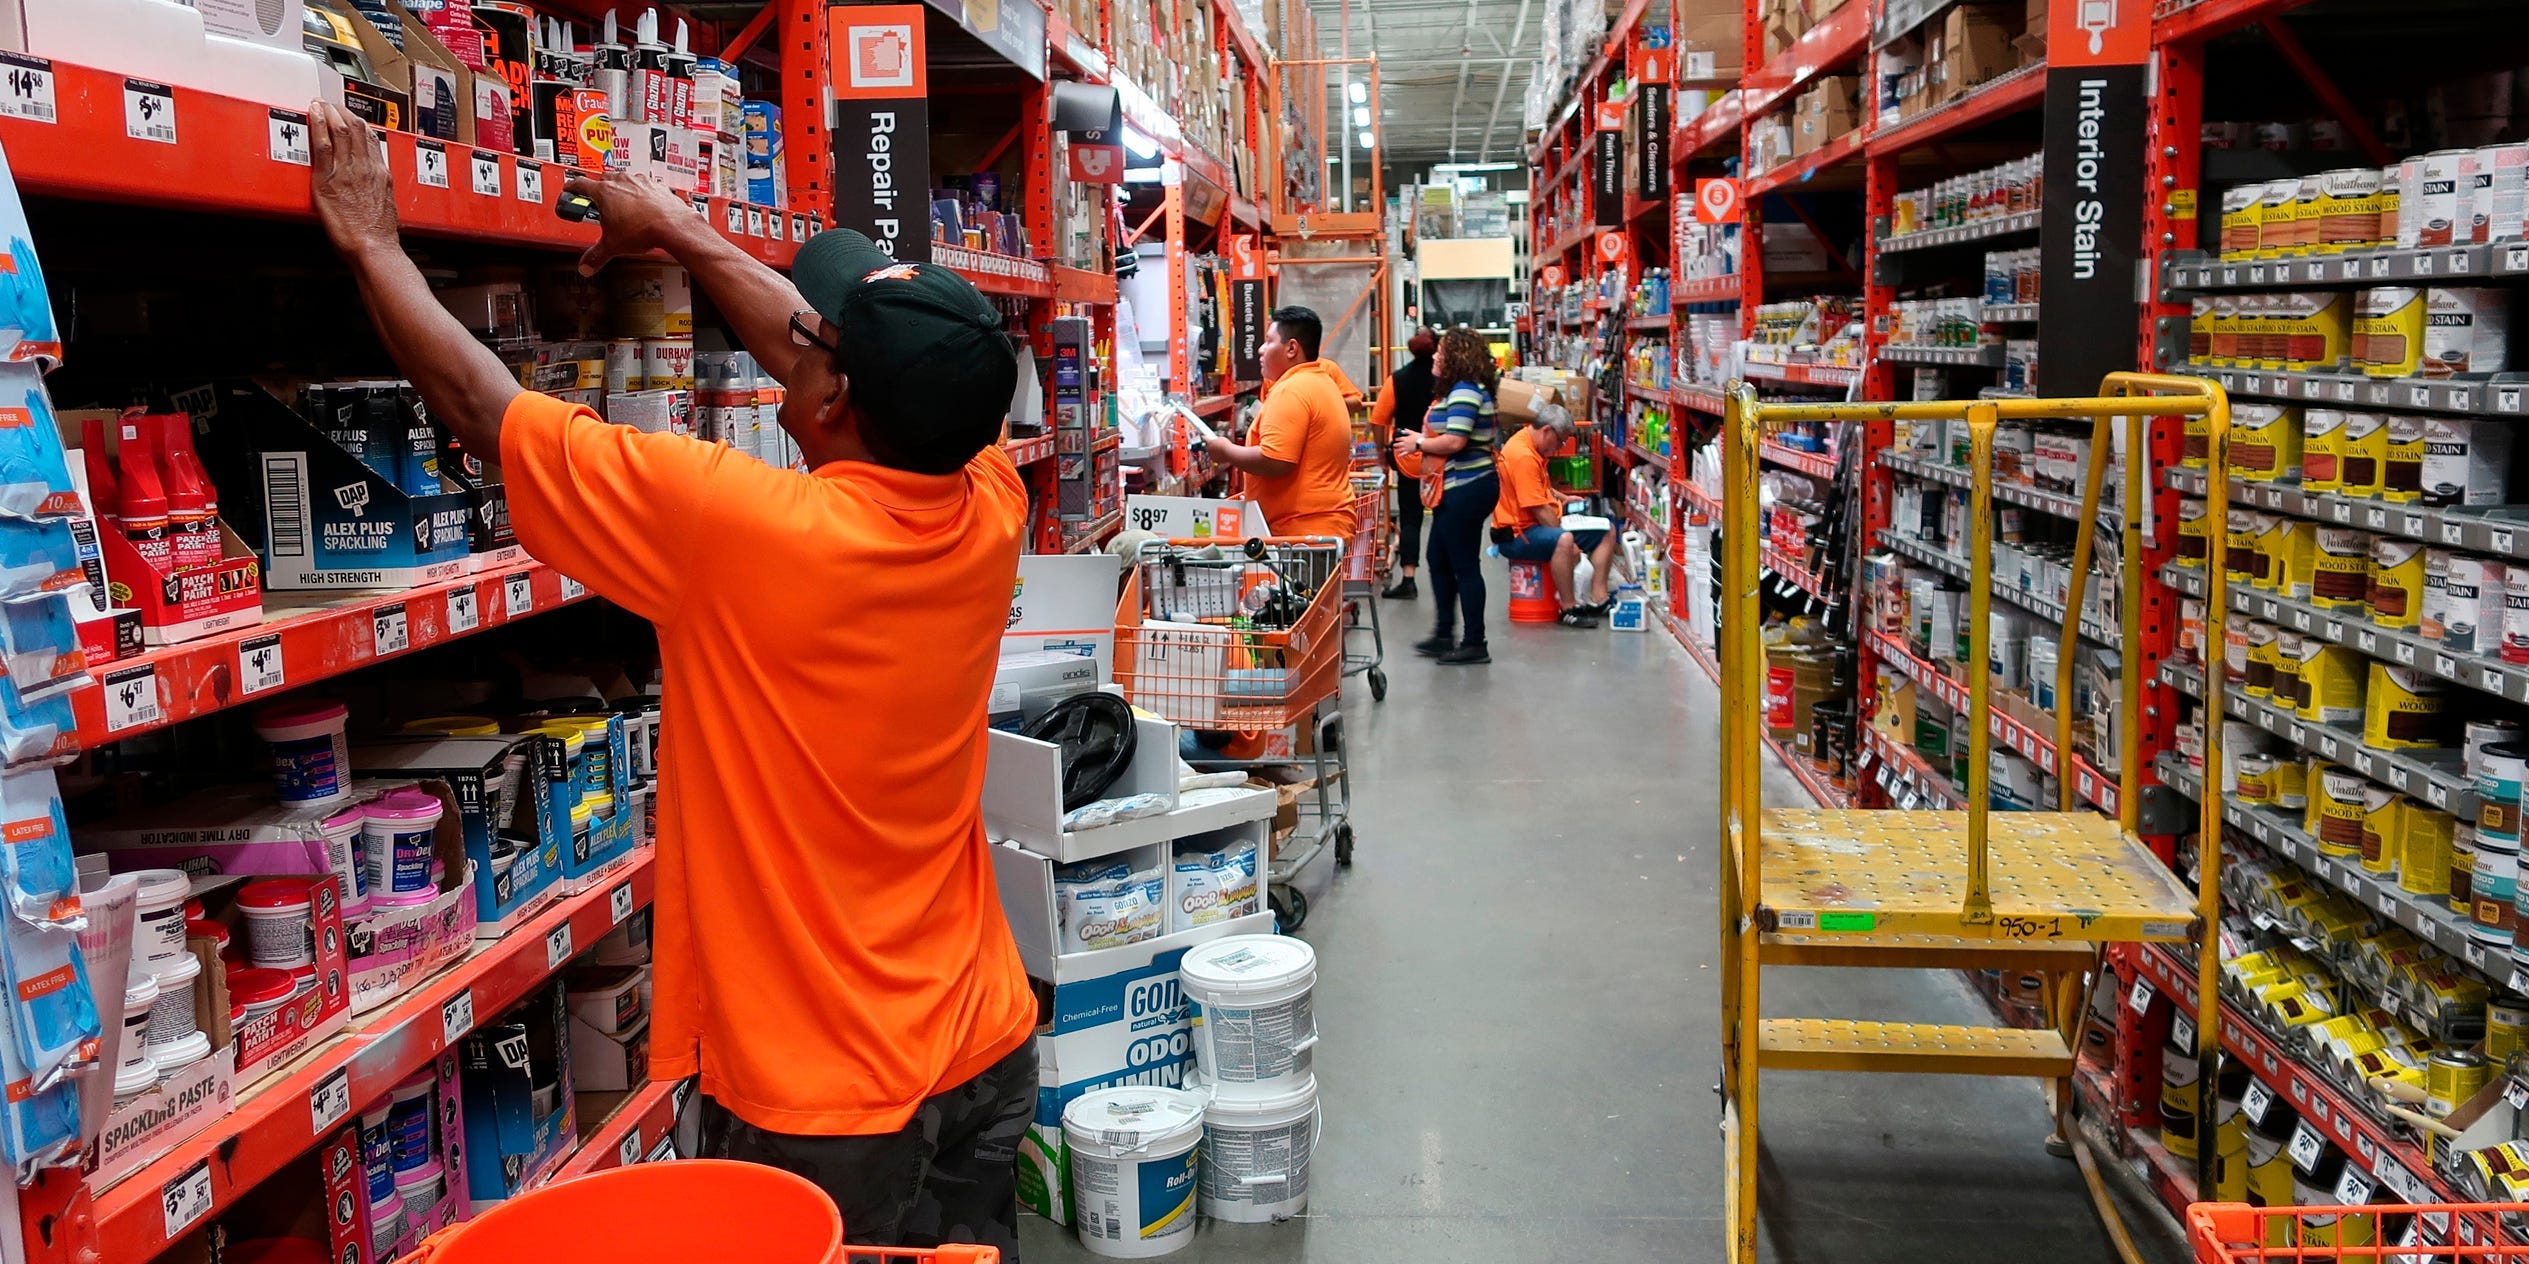 FILE- In this Aug. 14, 2018, file photo workers stock the shelves at a Home Depot store in Passaic, N.J. Home Depot Inc. reports financial results Tuesday, Feb. 26, 2019. (AP Photo/Ted Shaffrey, File)